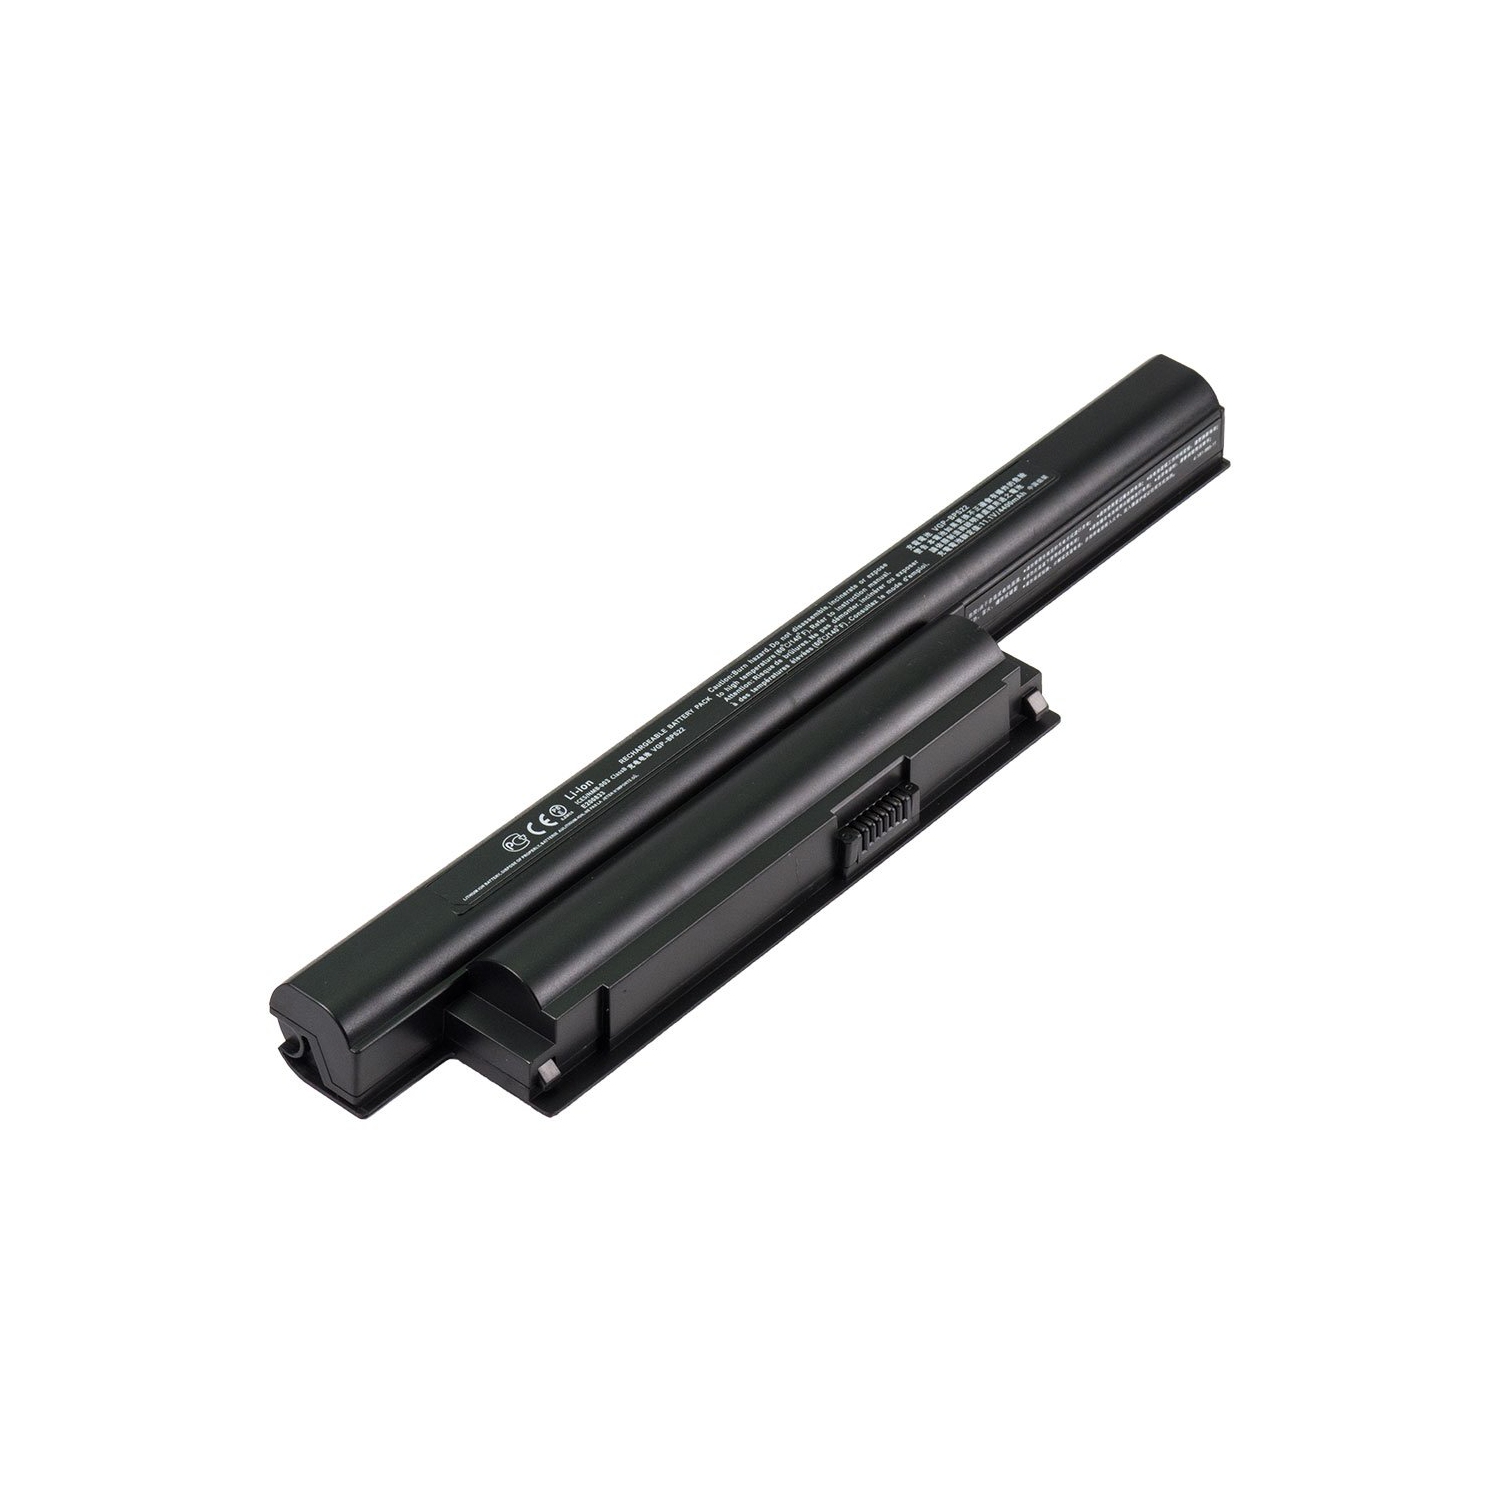 Laptop Battery Replacement for Sony VAIO VPC-EB1JFX/P, VGP-BPL22, VGP-BPS22, VGP-BPS22/A, VGP-BPS22A